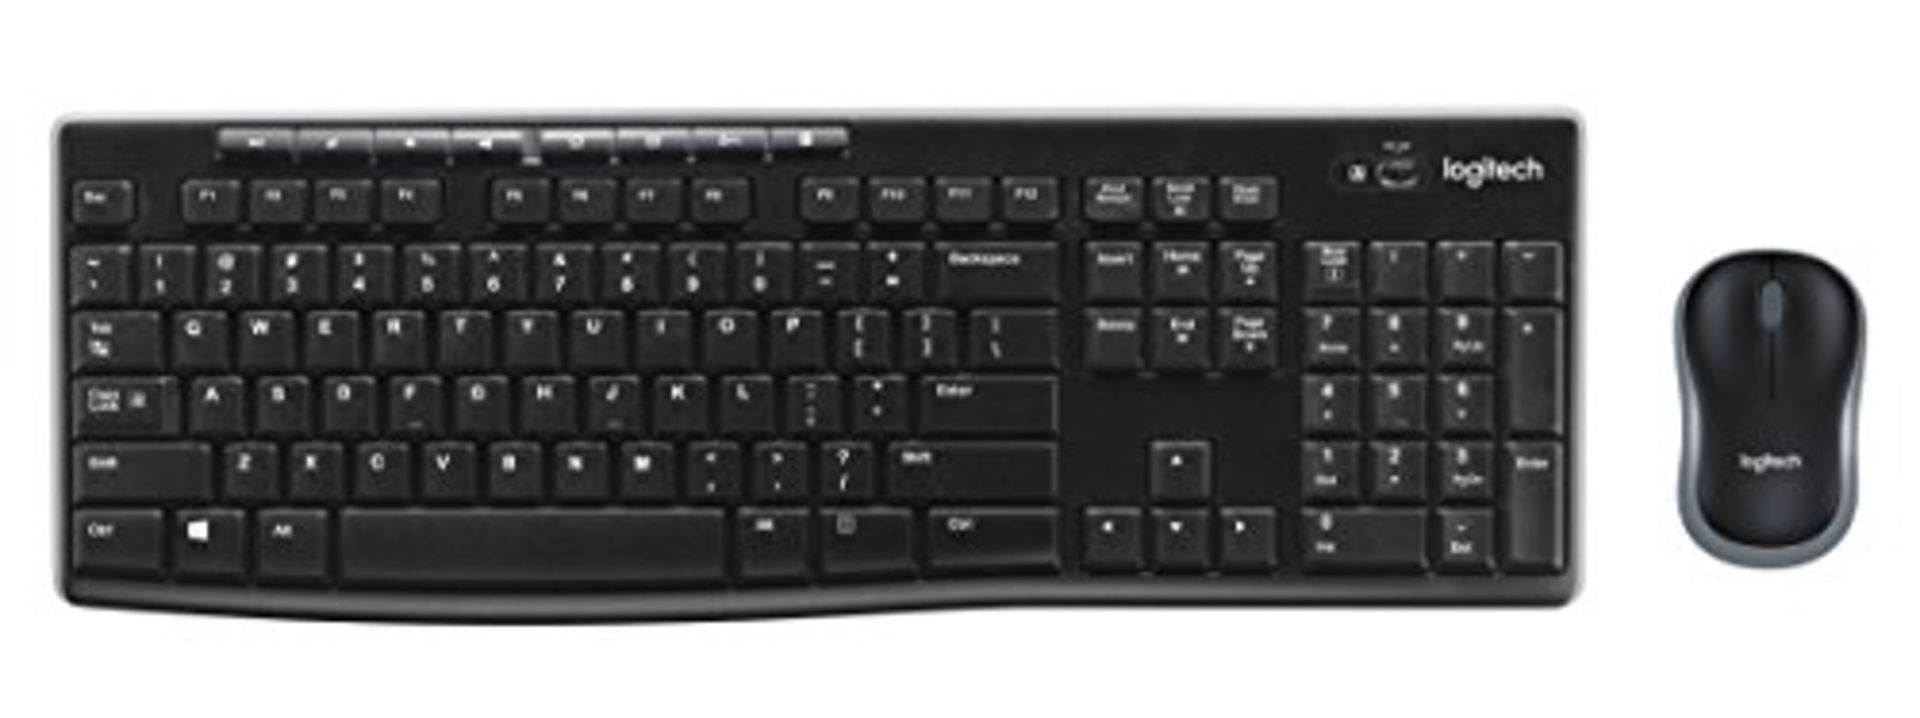 Logitech MK270 Wireless Keyboard and Mouse Combo for Windows, QWERTY Italian Layout -